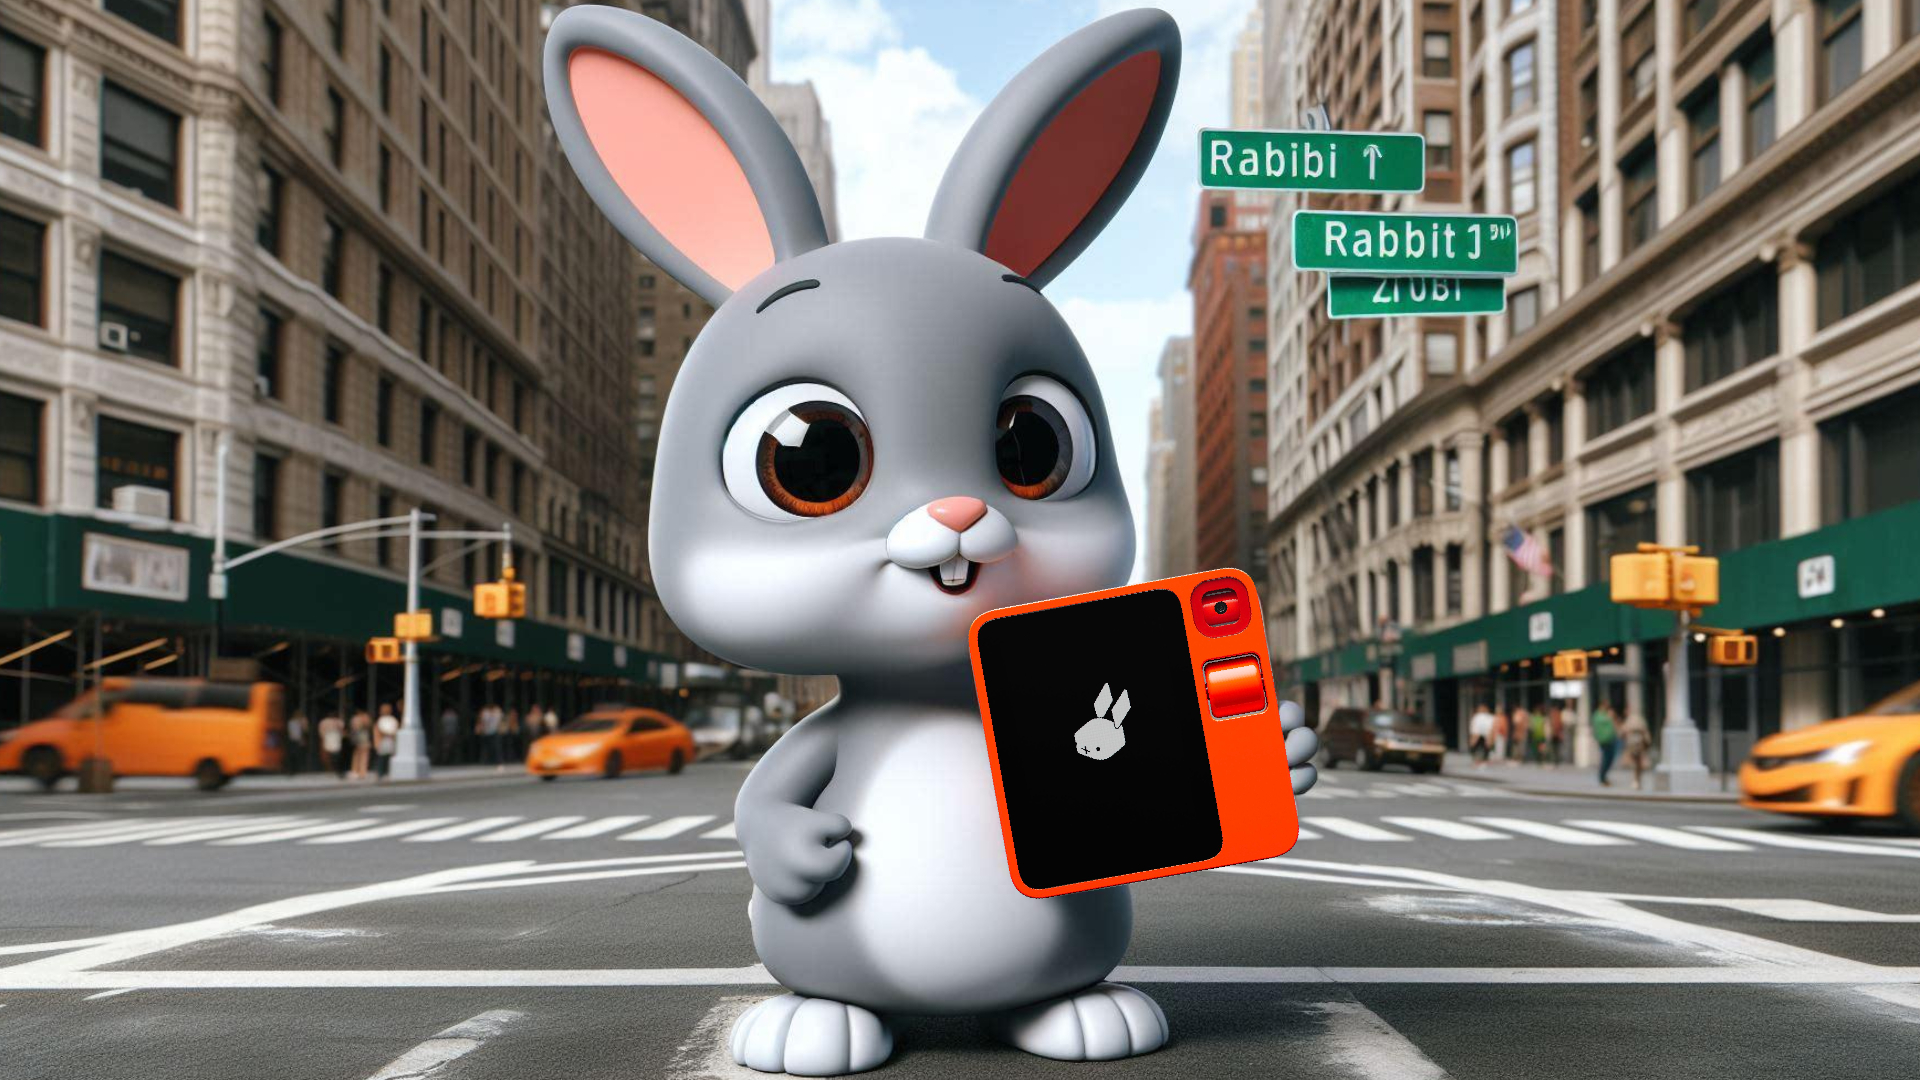 A CGI rabbit holding the Rabbit R1 device in New York City.